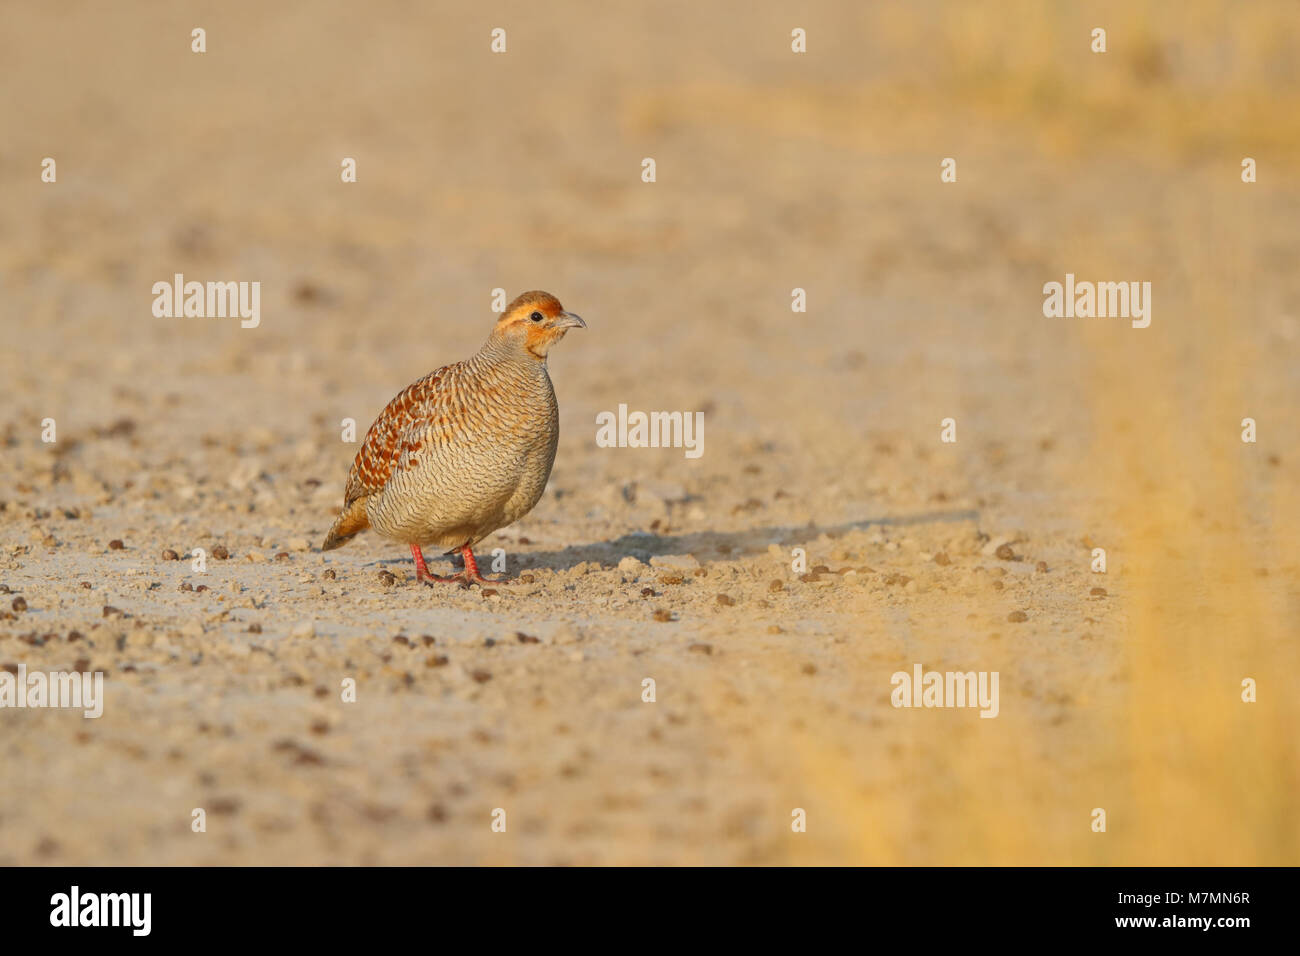 A wild adult Grey Francolin (Francolinus pondicerianus, of the race interpositus) on dry ground at Tal Chhapar Sanctuary in Rajasthan, India Stock Photo